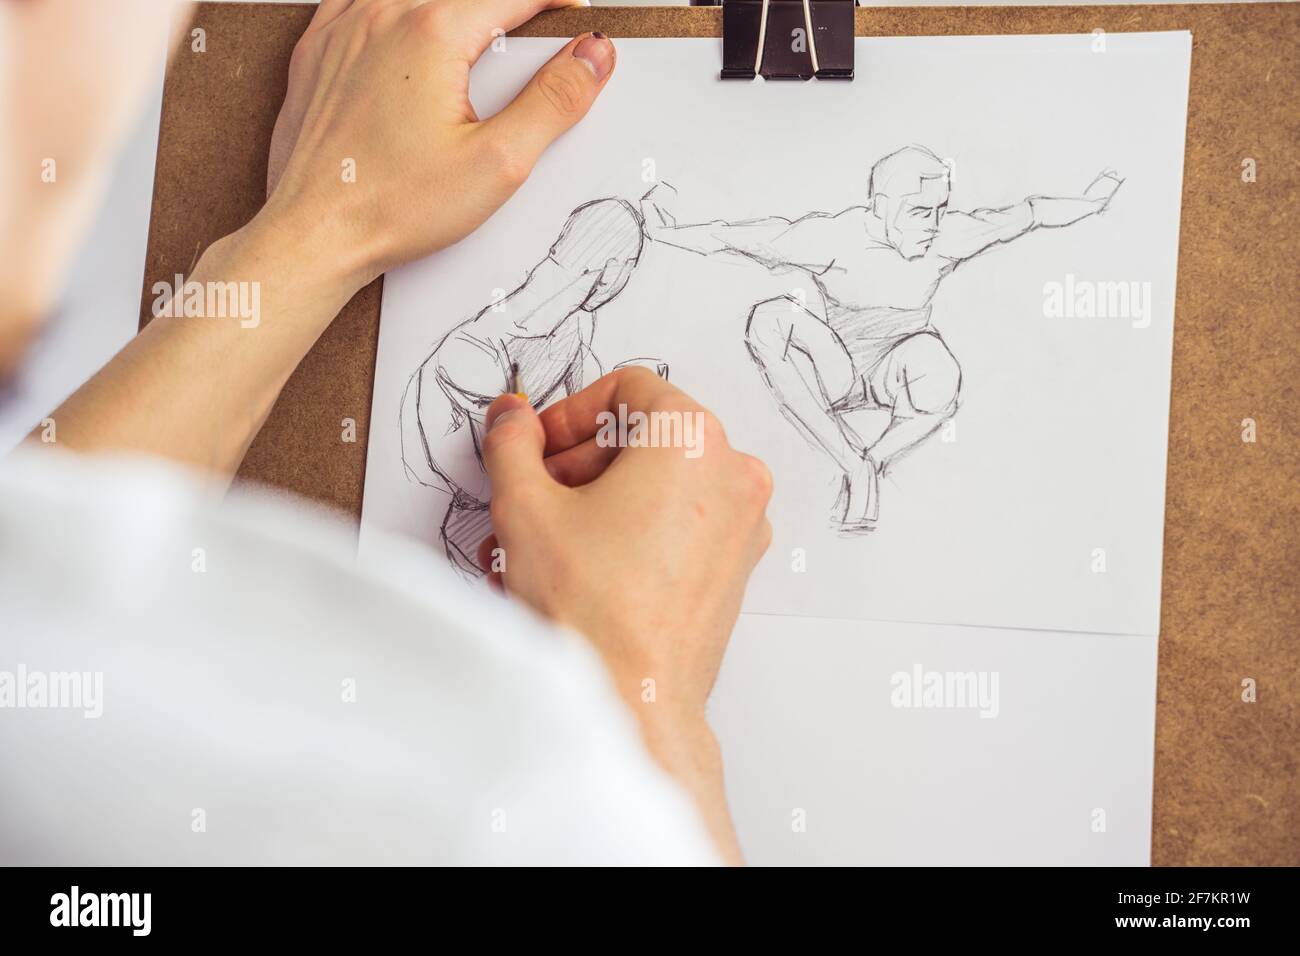 Artist drawing figure pencil sketches. Artwork background Stock Photo